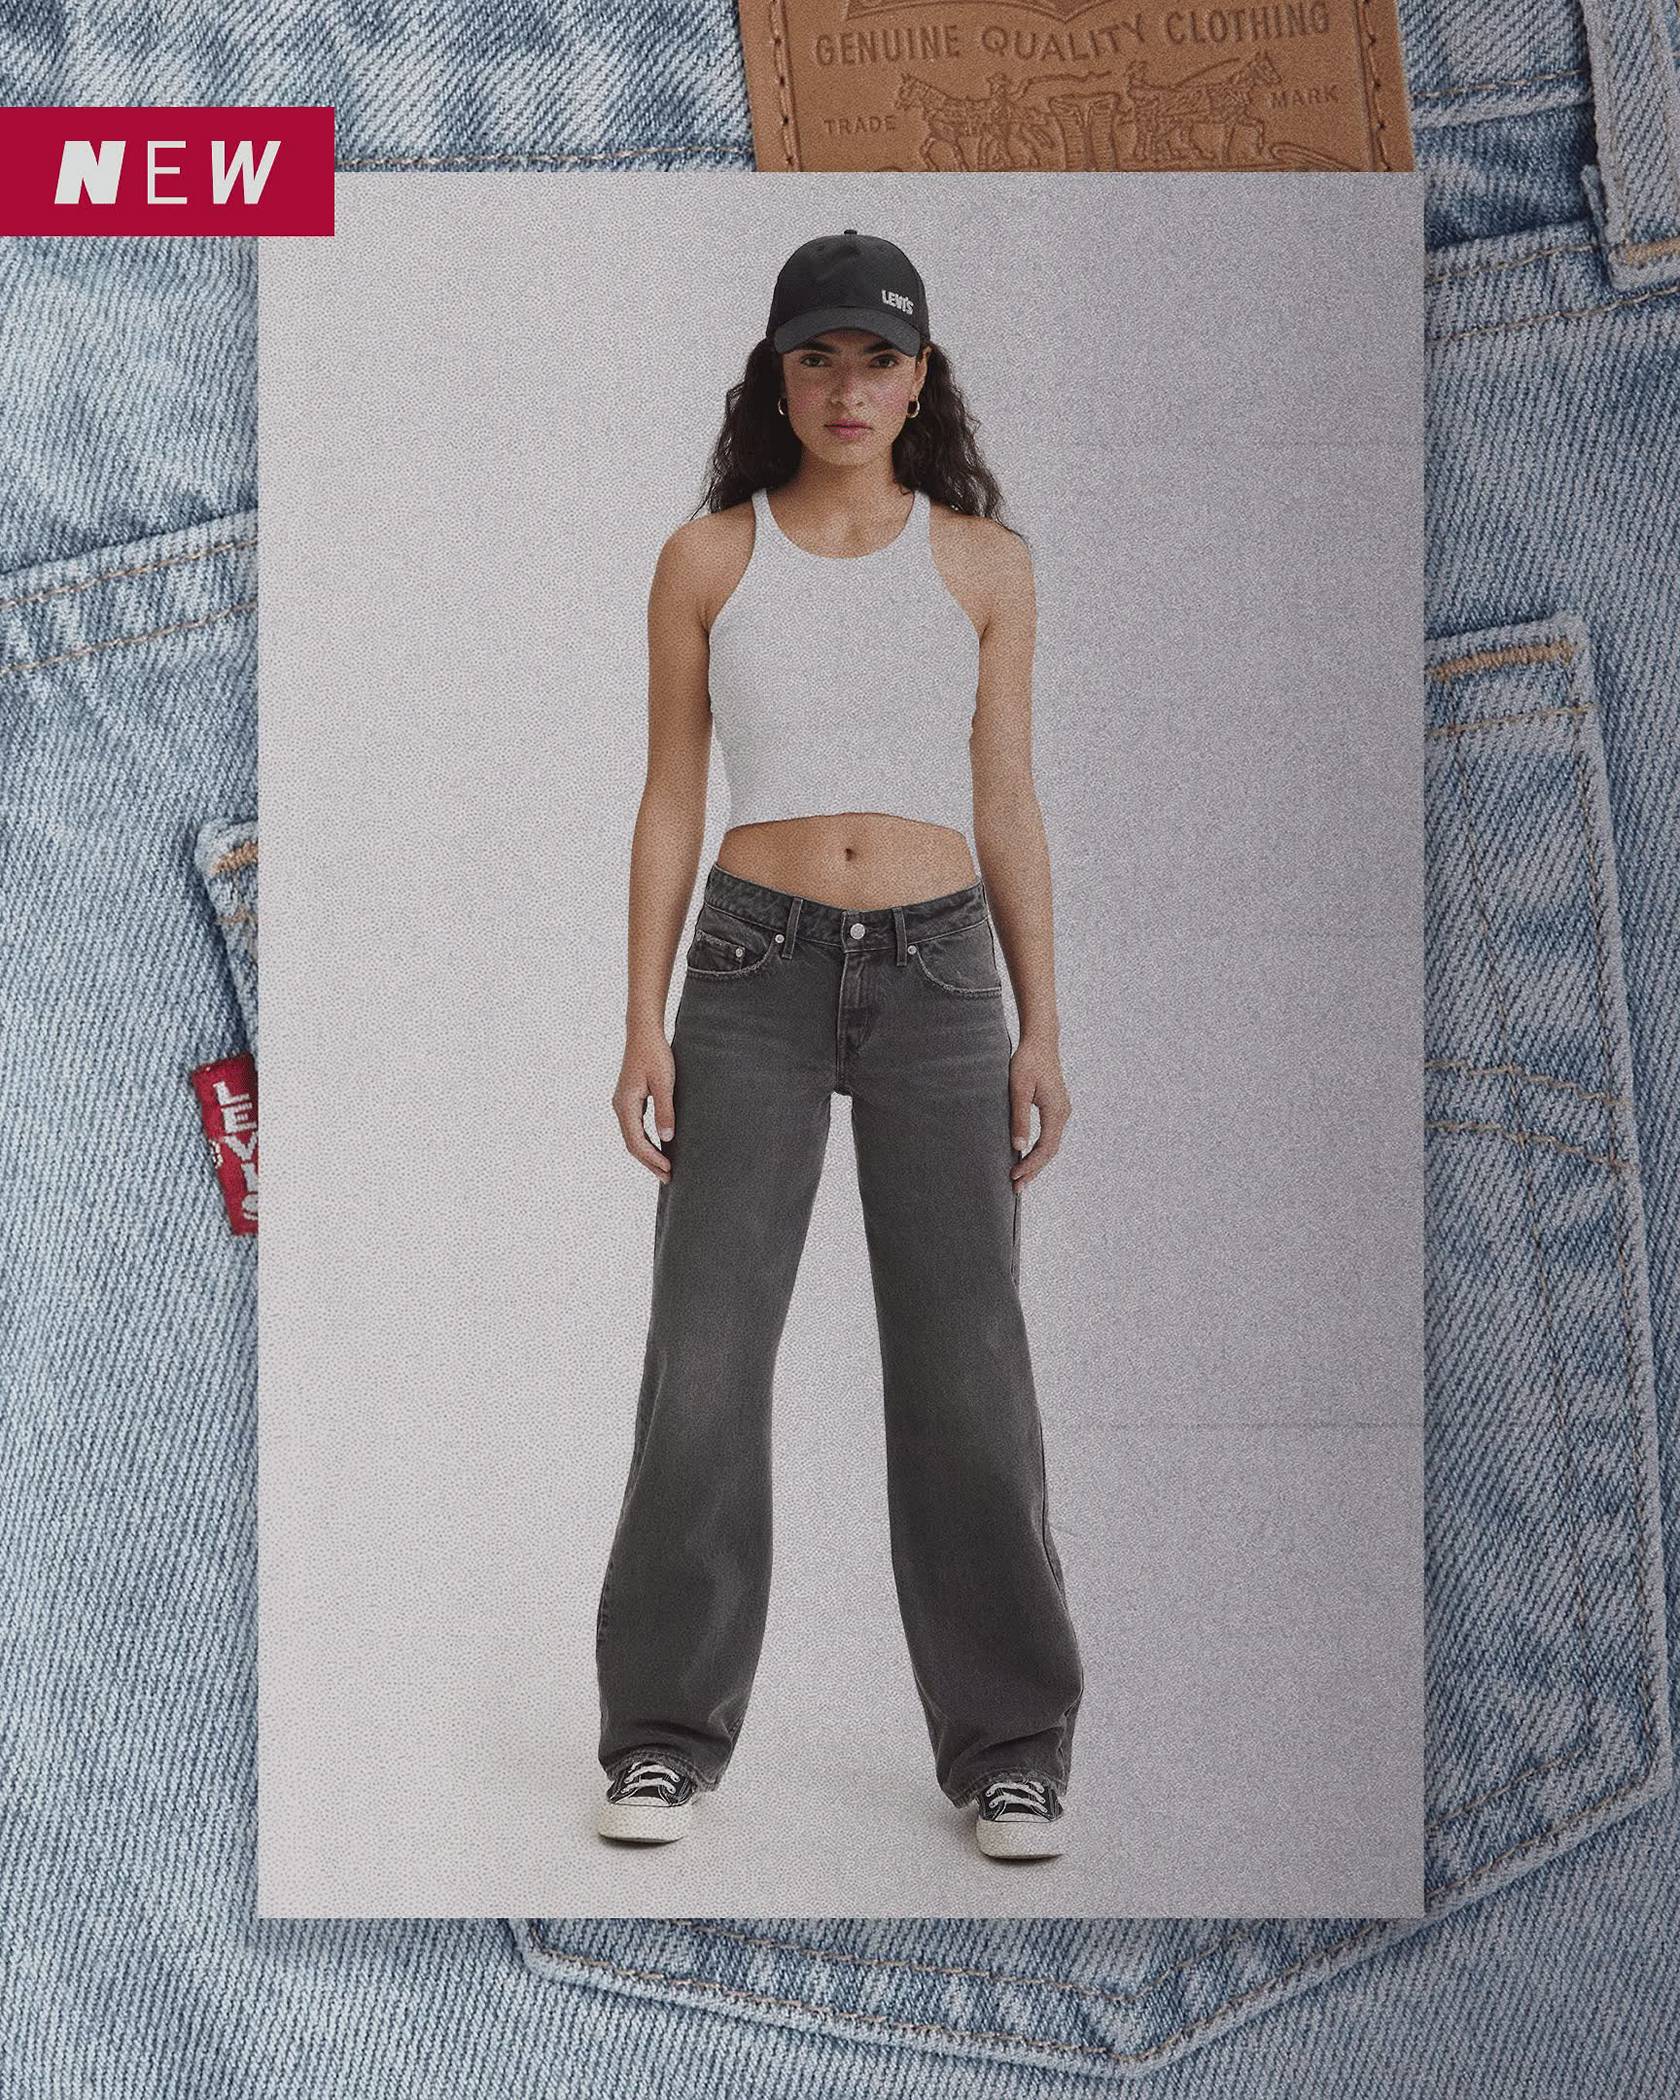 Asesor claridad Empleado Men's & Women's Jeans & Clothing - Extra 50% Off Sale| Levi's® US